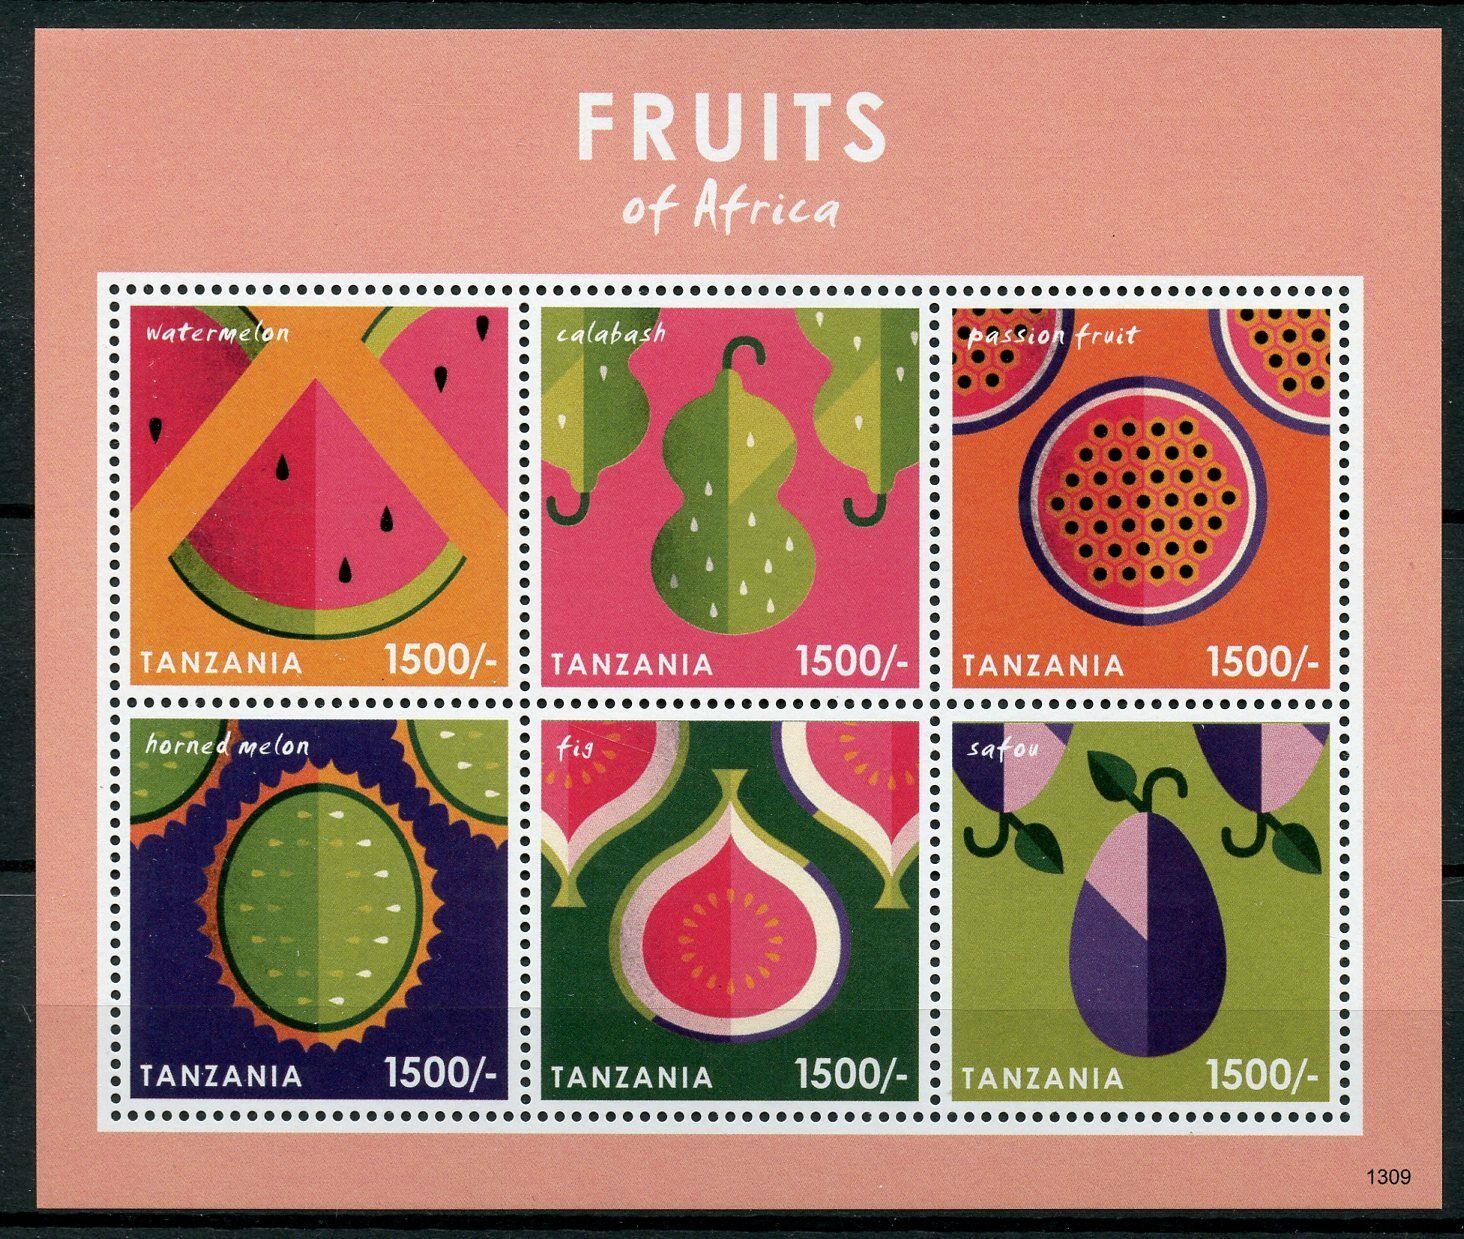 Tanzania 2013 MNH Fruits of Africa Stamps Calabash Fig Safou Watermelon 6v M/S